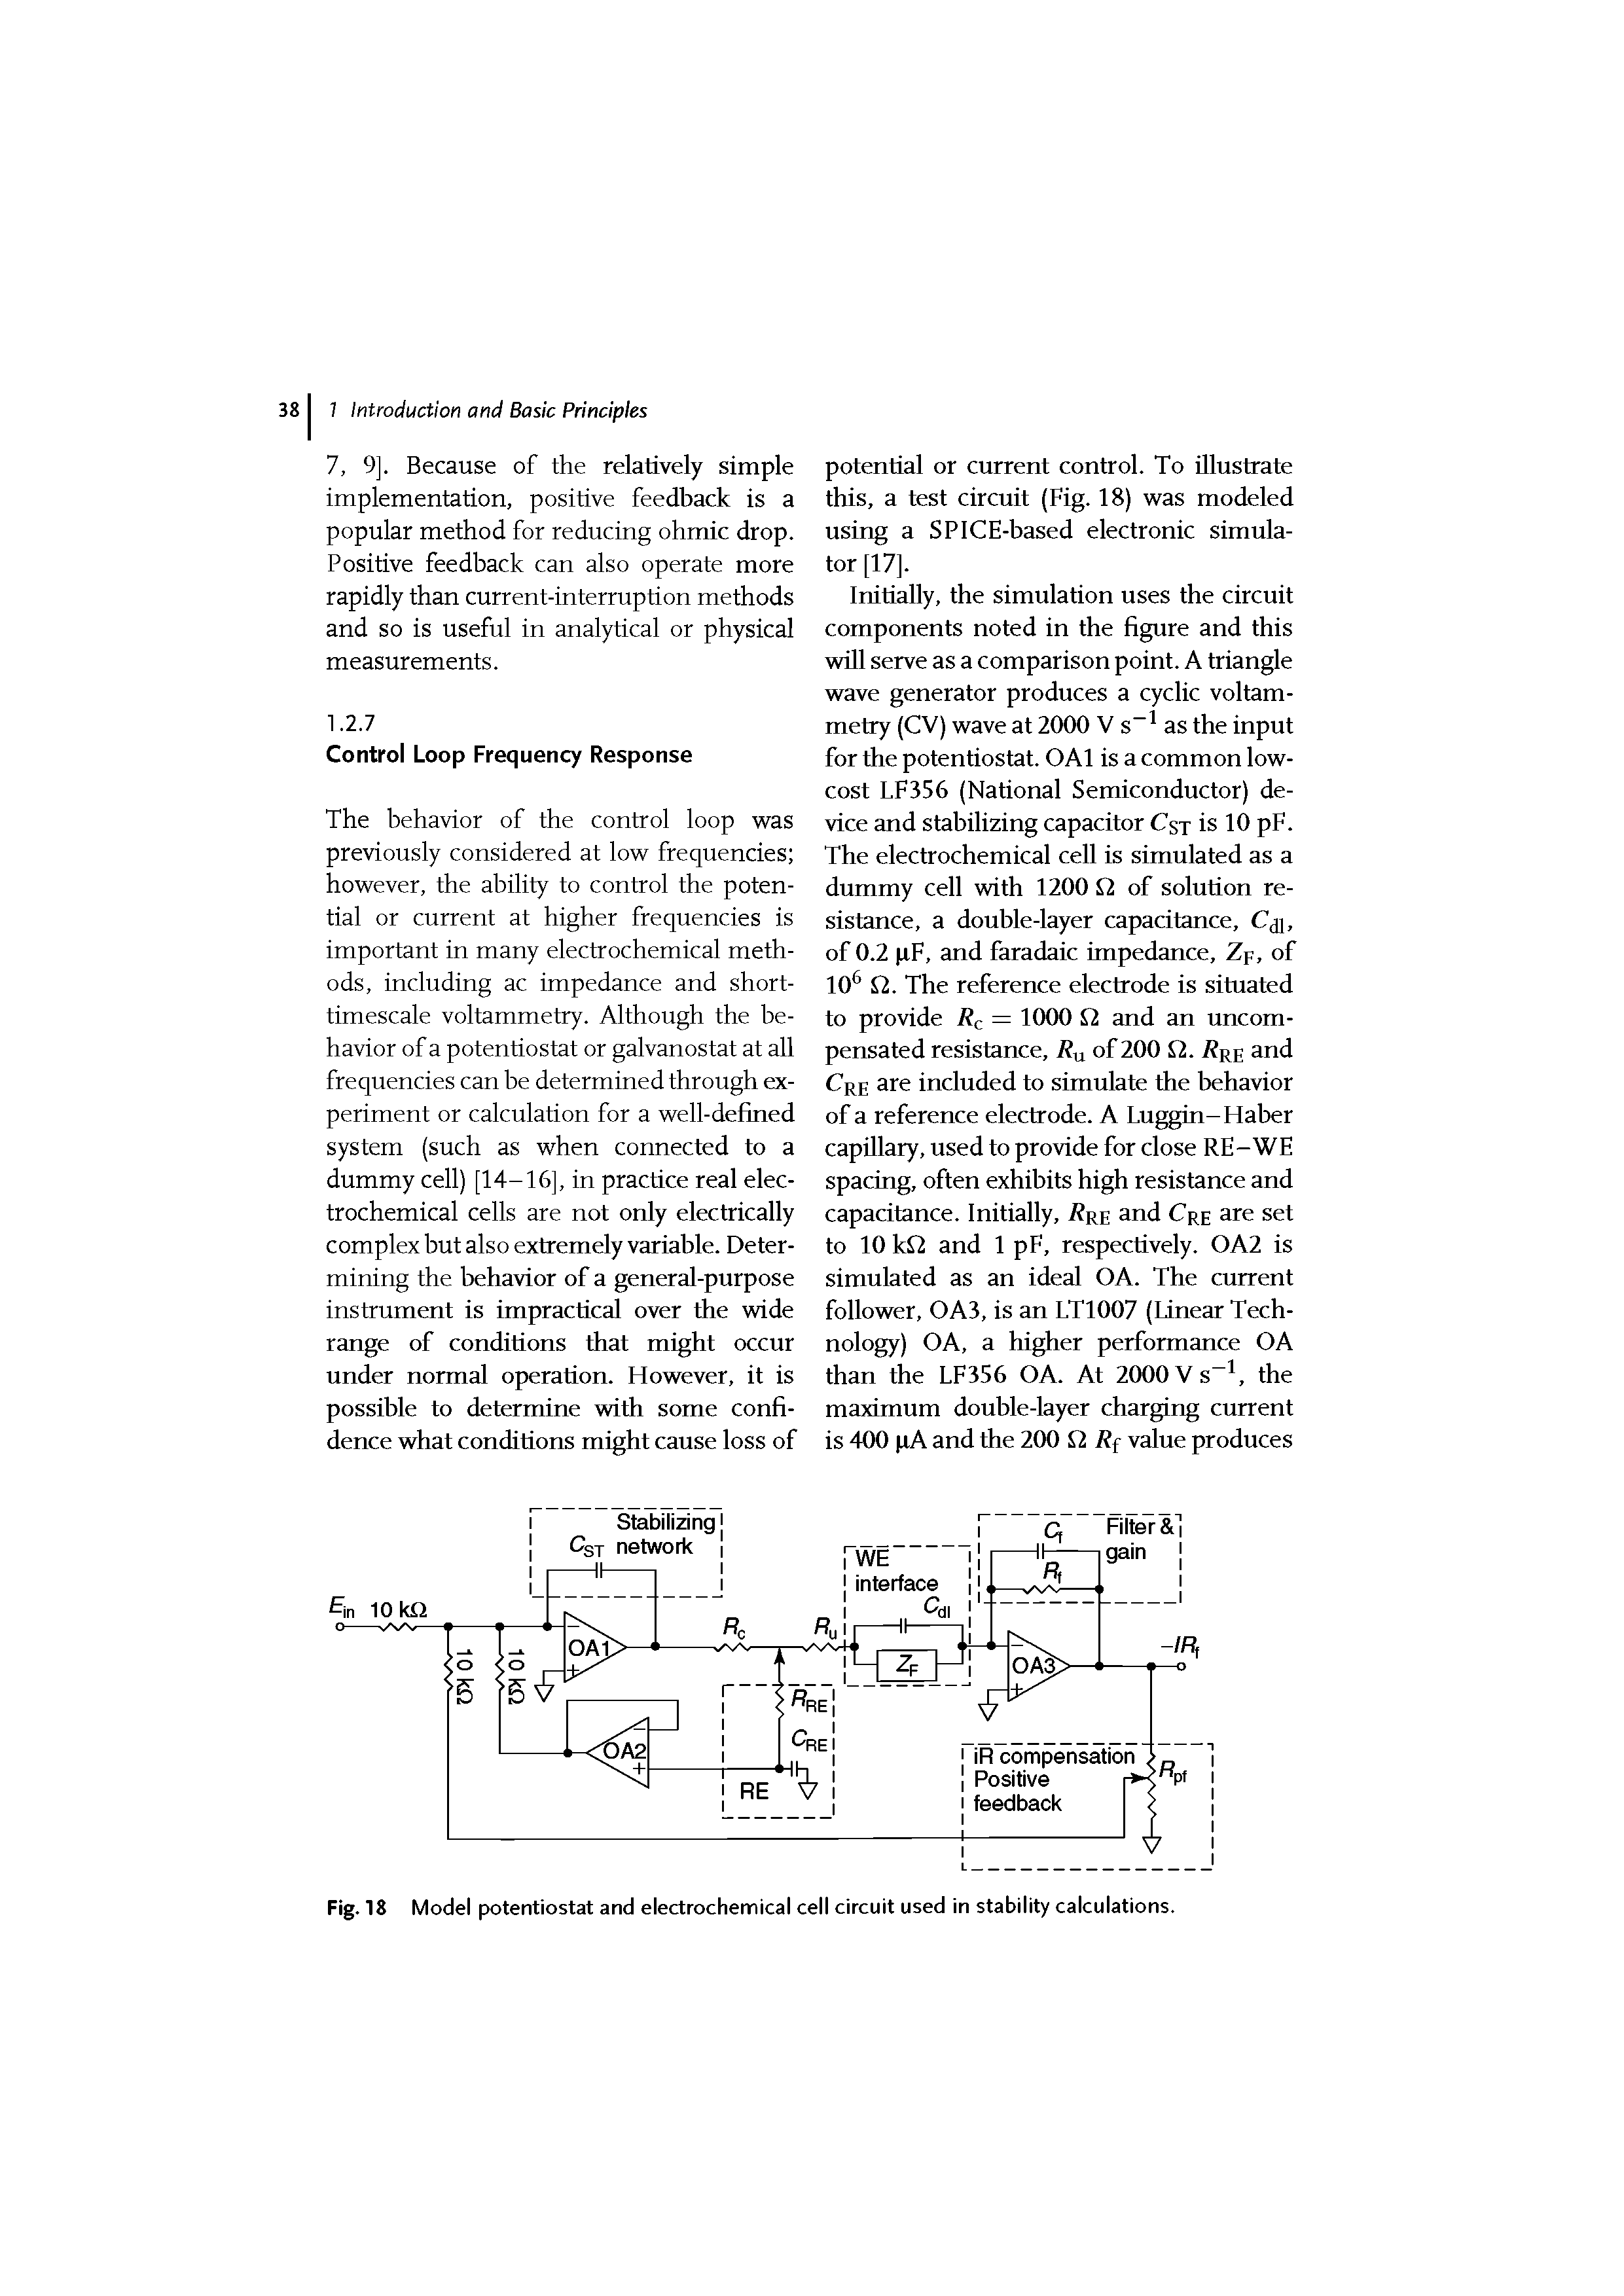 Fig. 18 Model potentiostat and electrochemical cell circuit used in stability calculations.